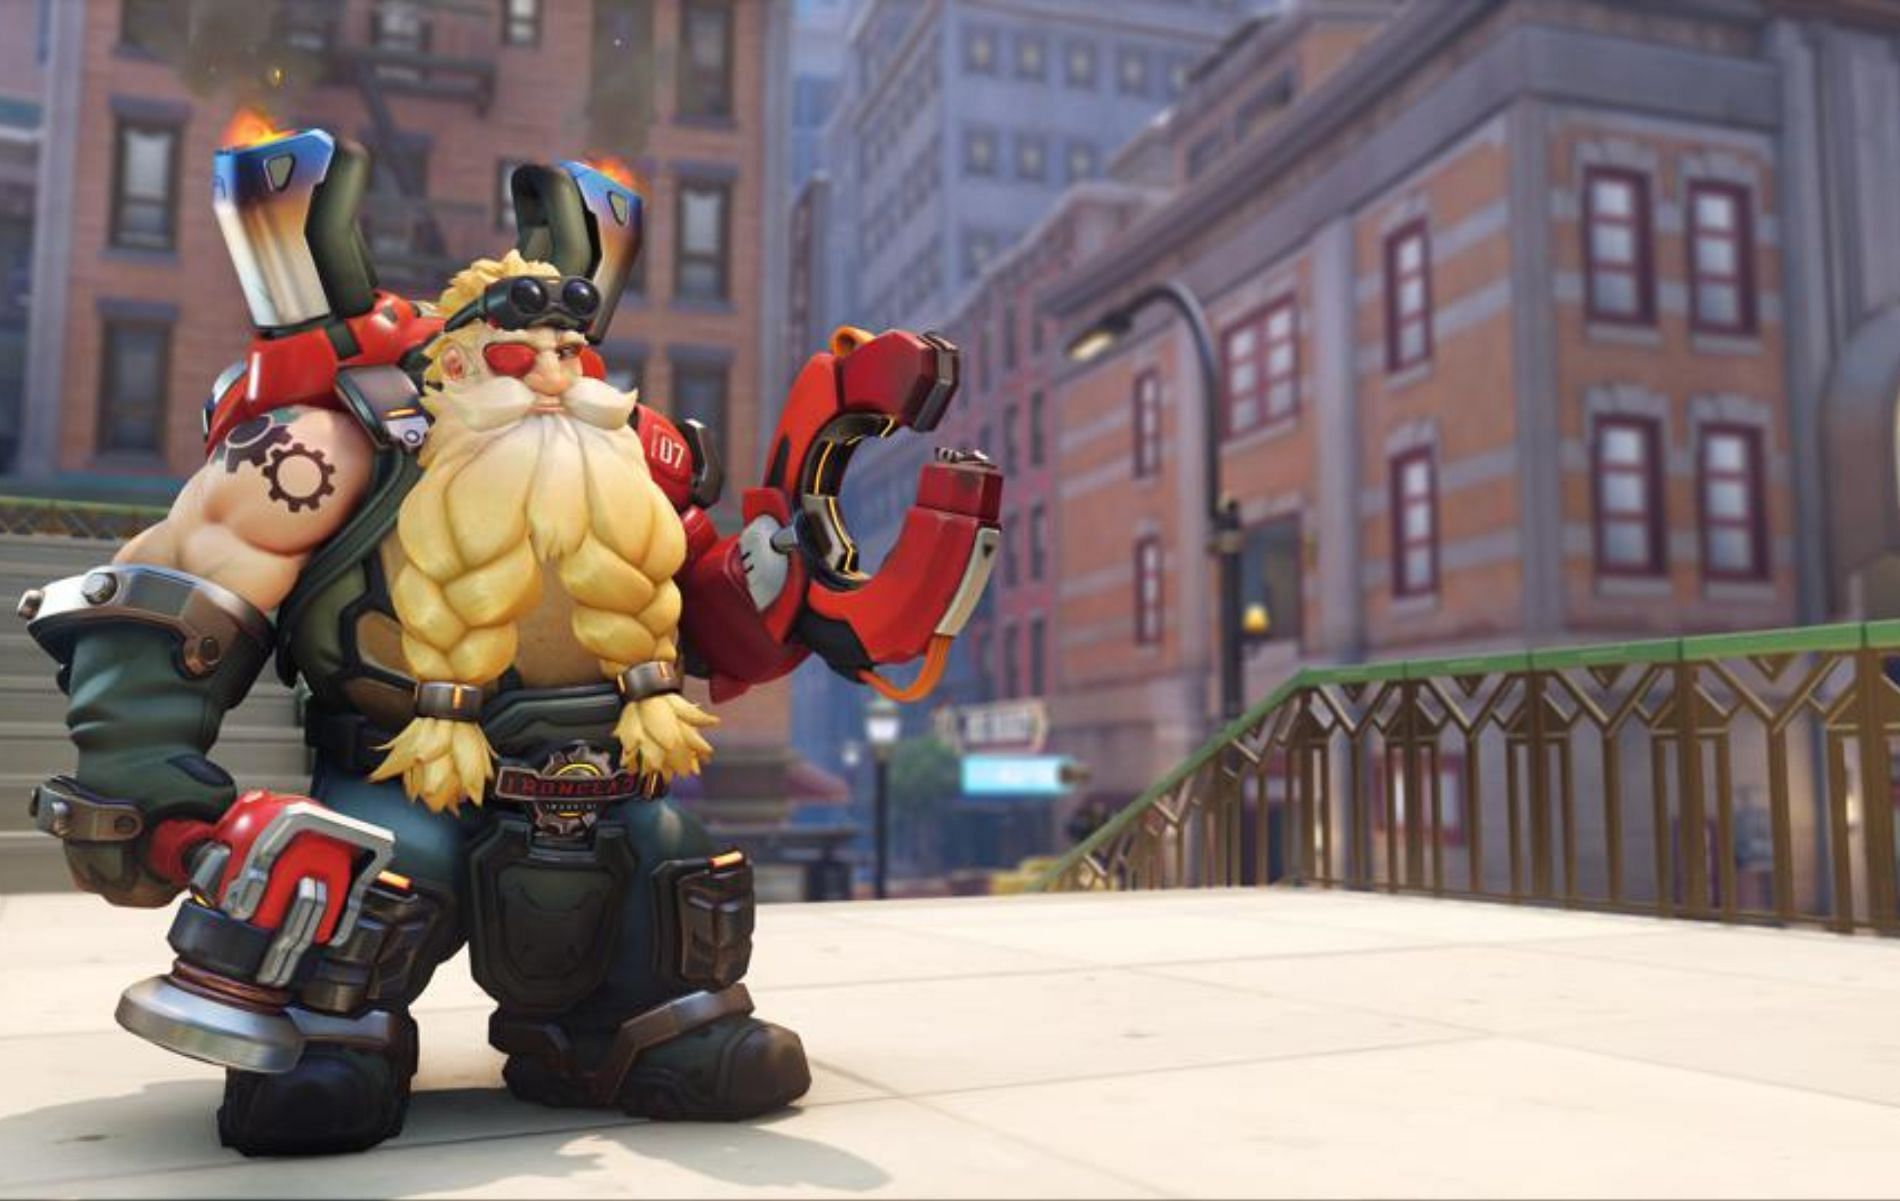 The revamped version of Torbjorn in Overwatch 2 (Image via Blizzard Entertainment)